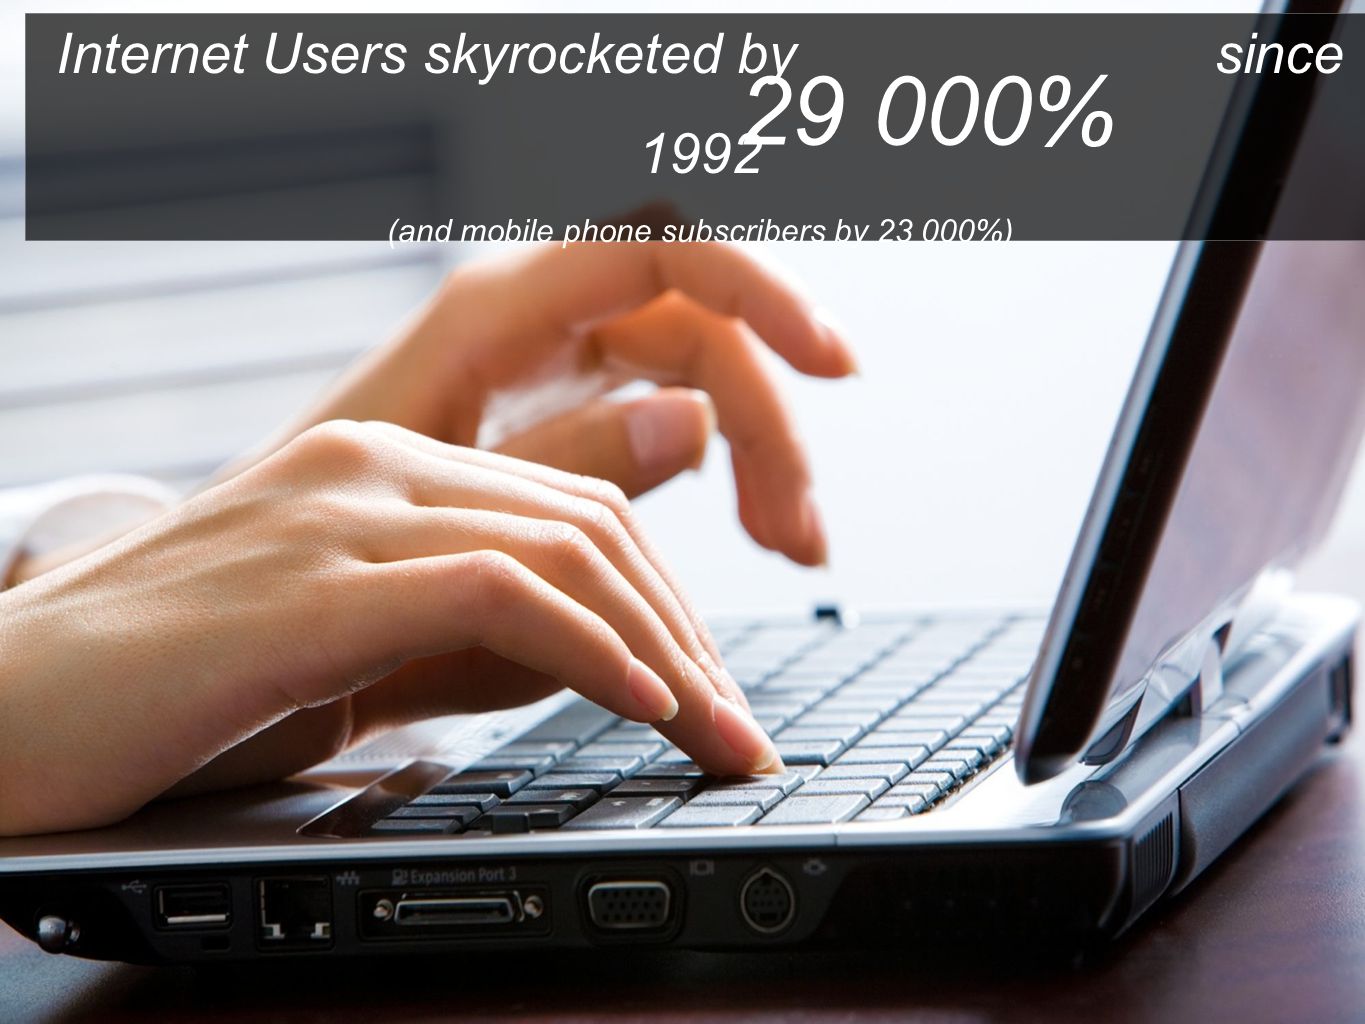 Internet Users skyrocketed by since 1992 (and mobile phone subscribers by %) %